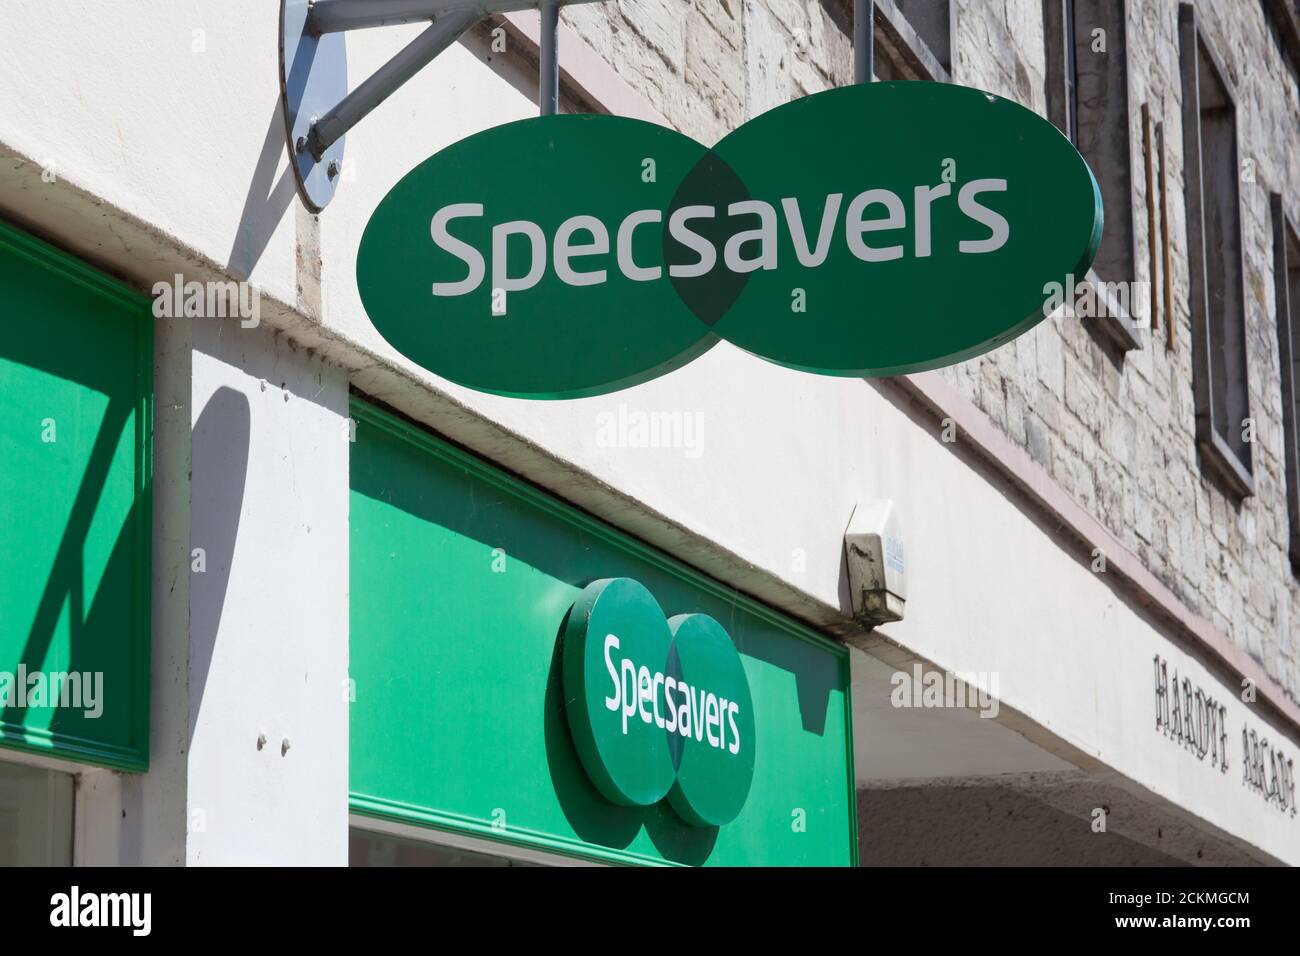 The Specsavers sign outside an opticians in the UK Stock Photo